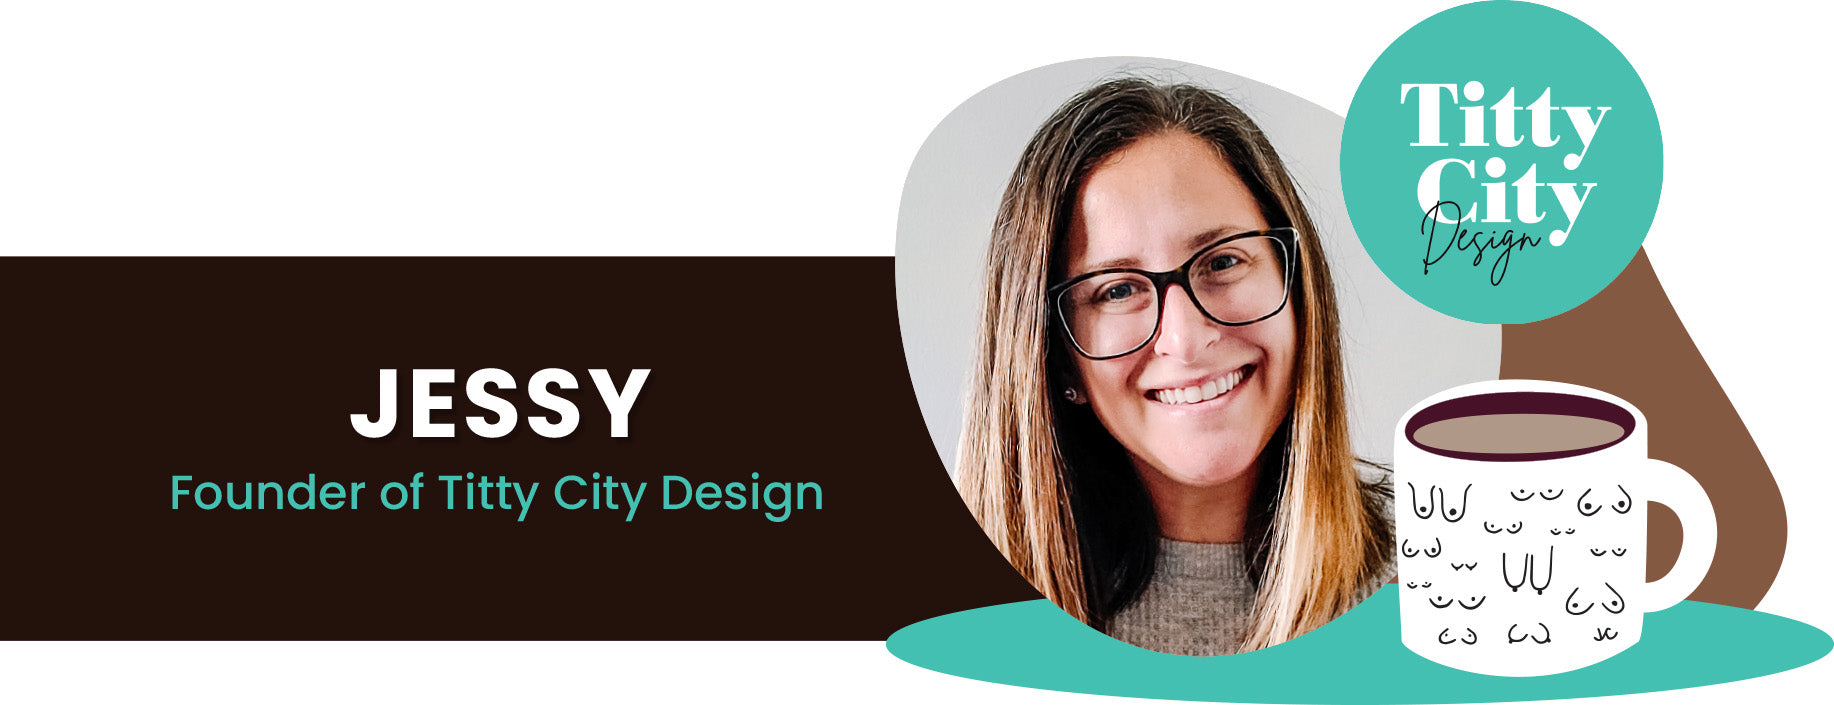 Titty Talks with Jessy, Founder of Titty City Design